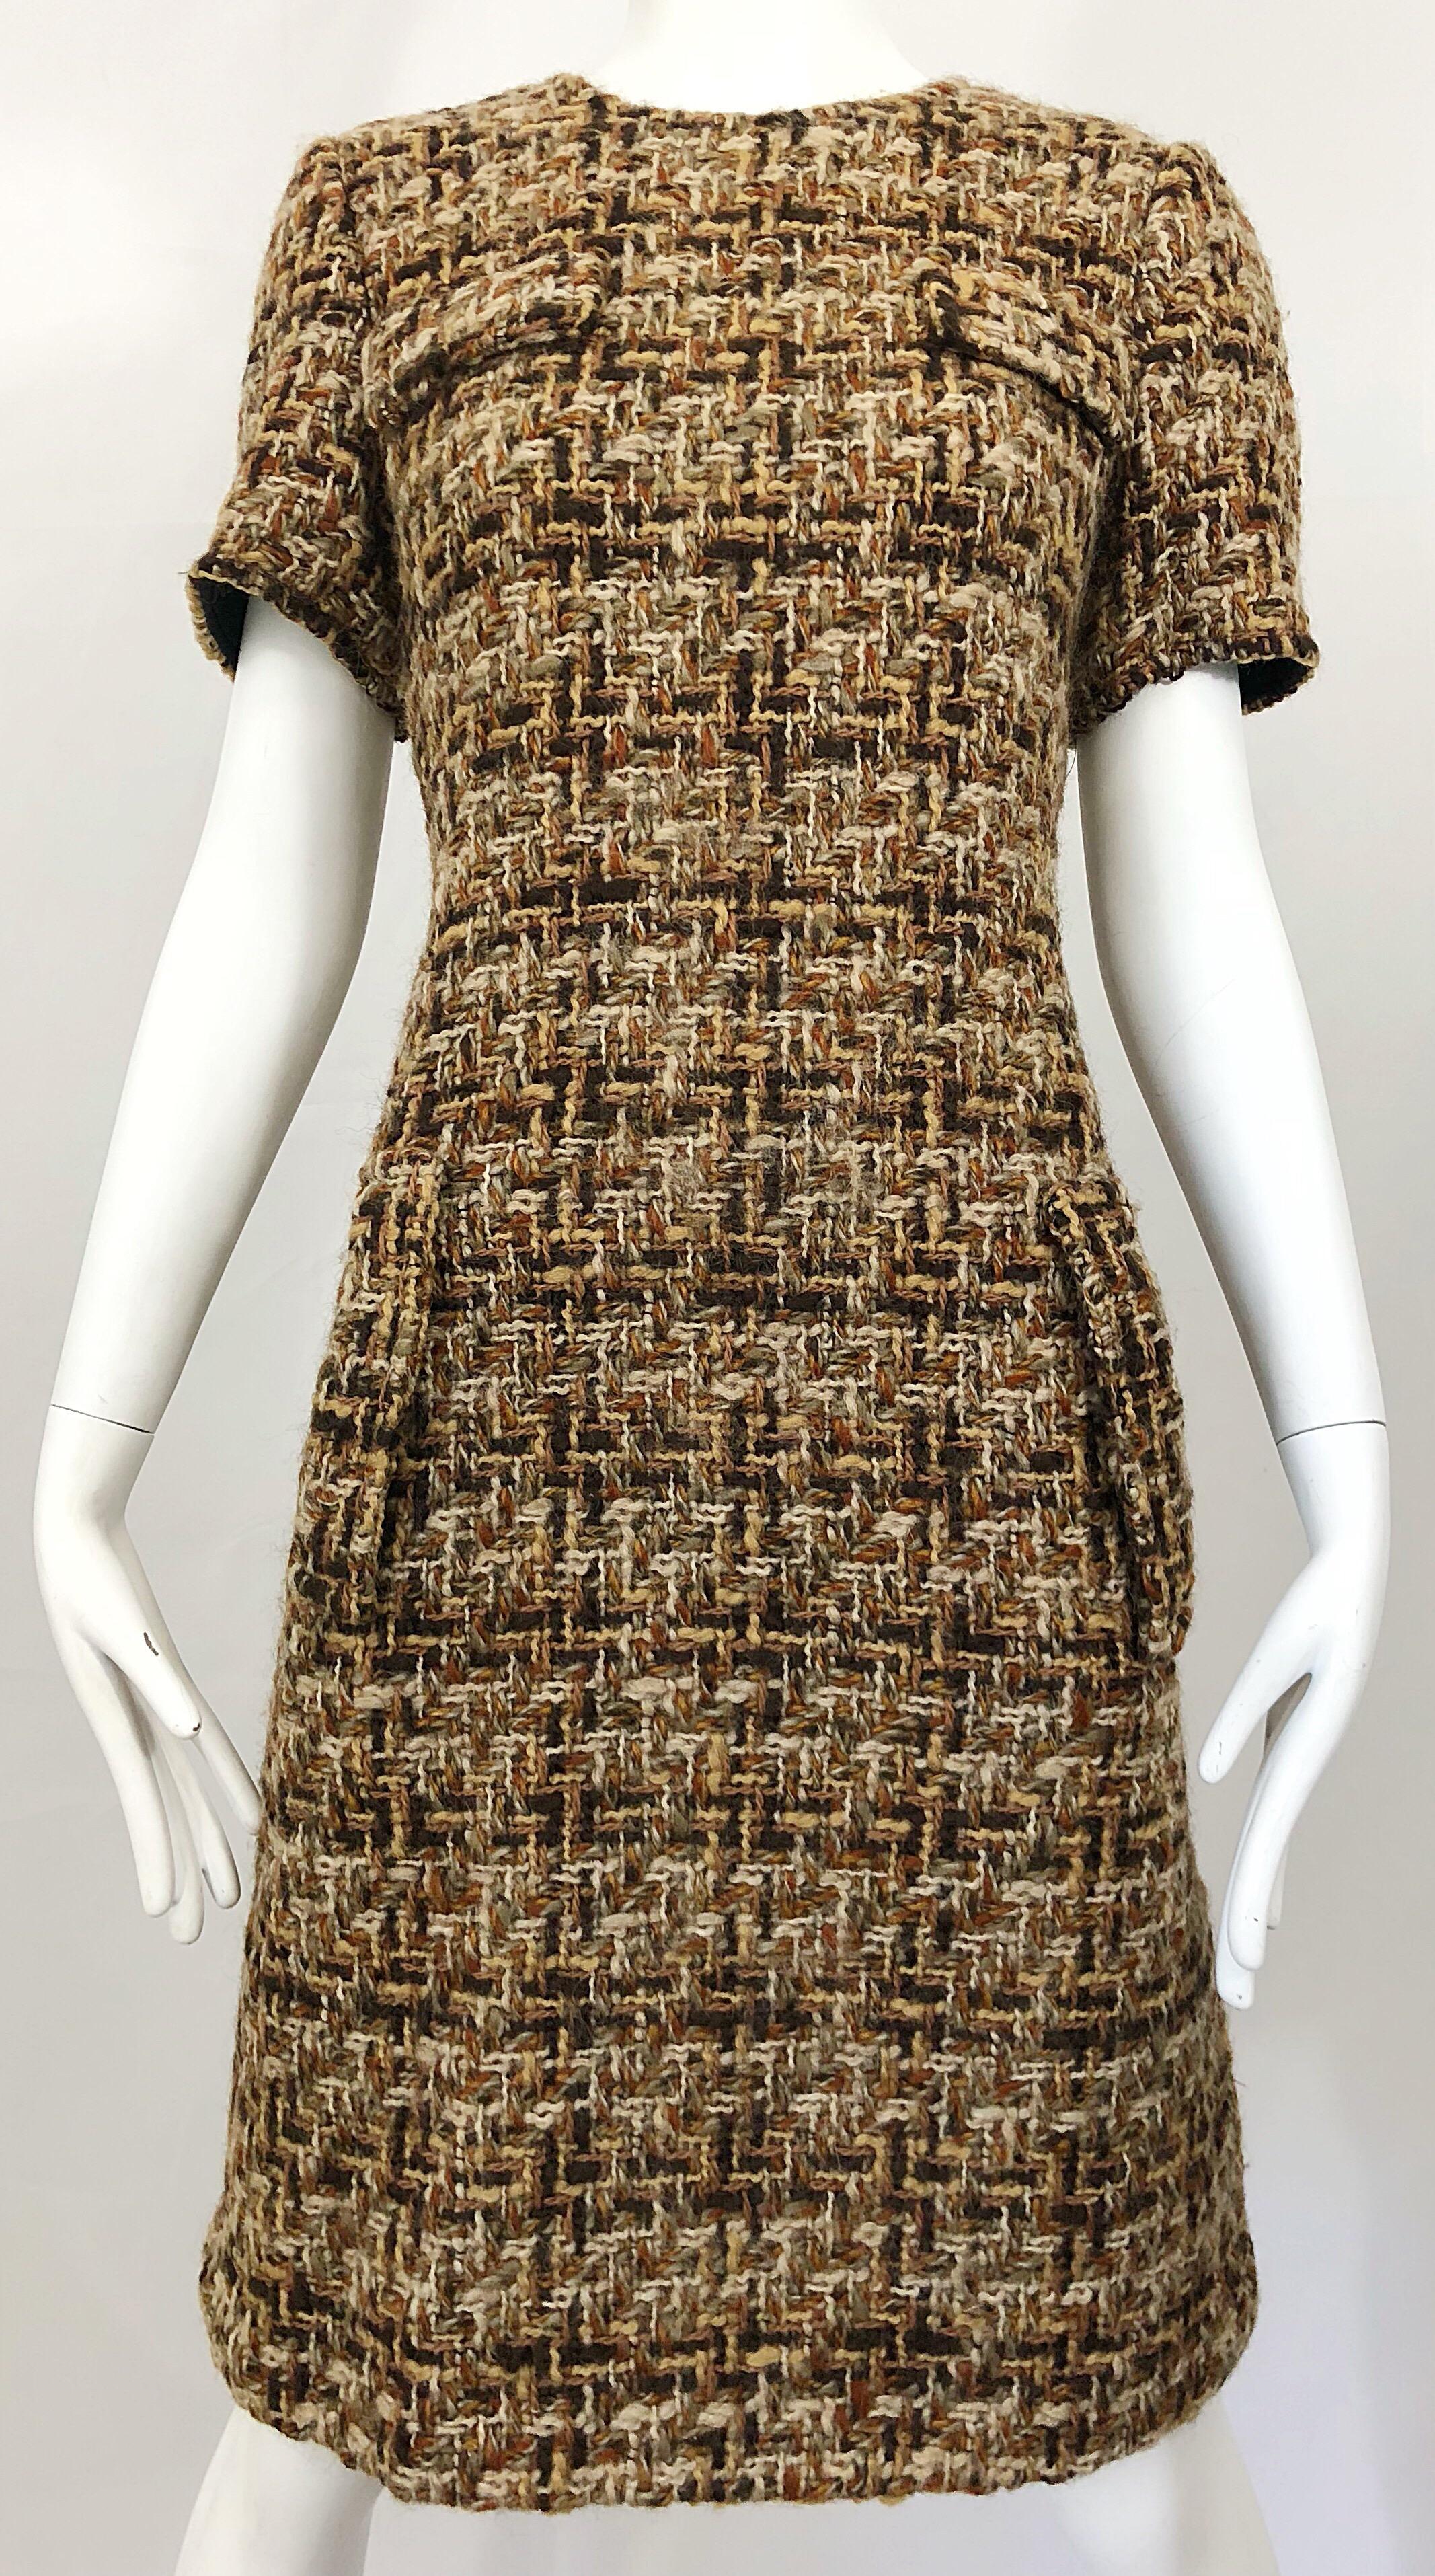 Chic 1960s brown, taupe, rust, ivory and black short sleeve wool boucle shift dress! Features super soft woven wool boucle. Fitted bodice with a forgiving slightly flared skirt. POCKETS at each side of the waist. Full metal zipper up the back with